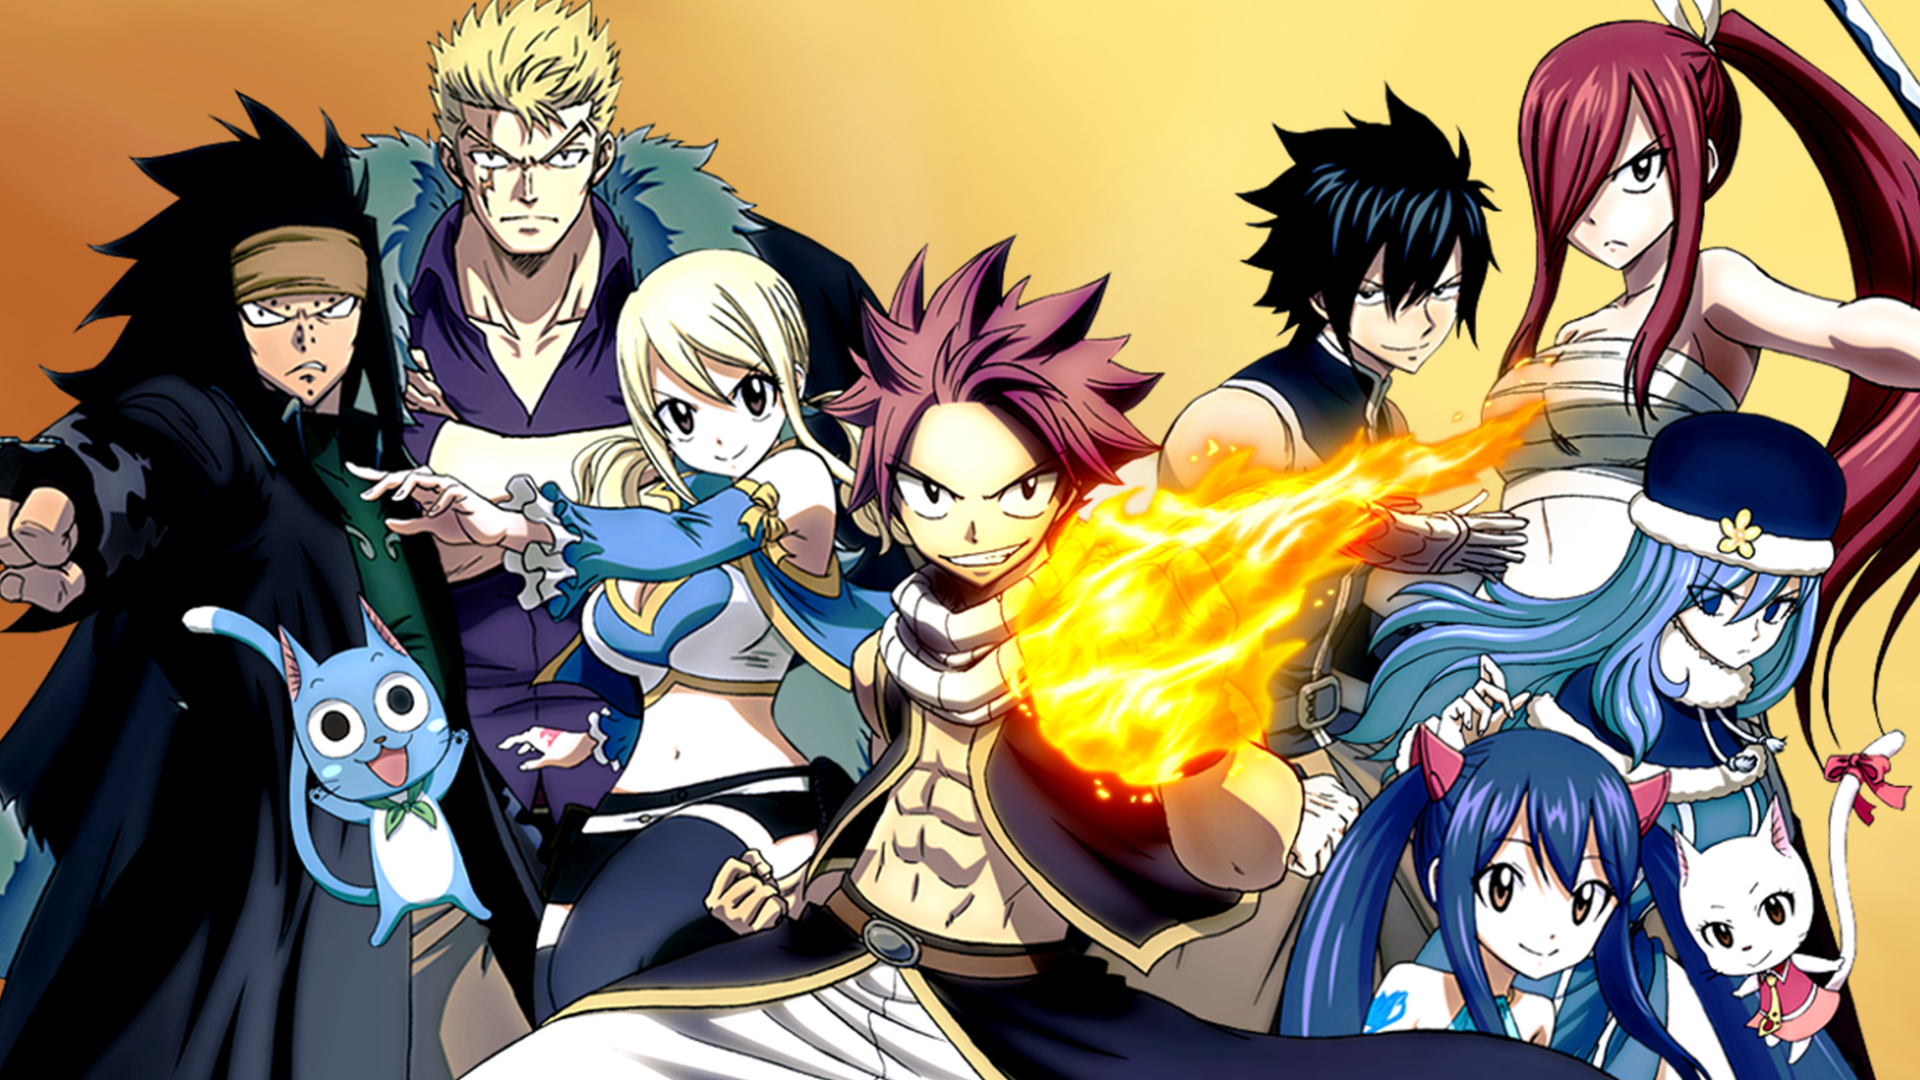 Fairy Tail - A Hero's Journey - MMO Square